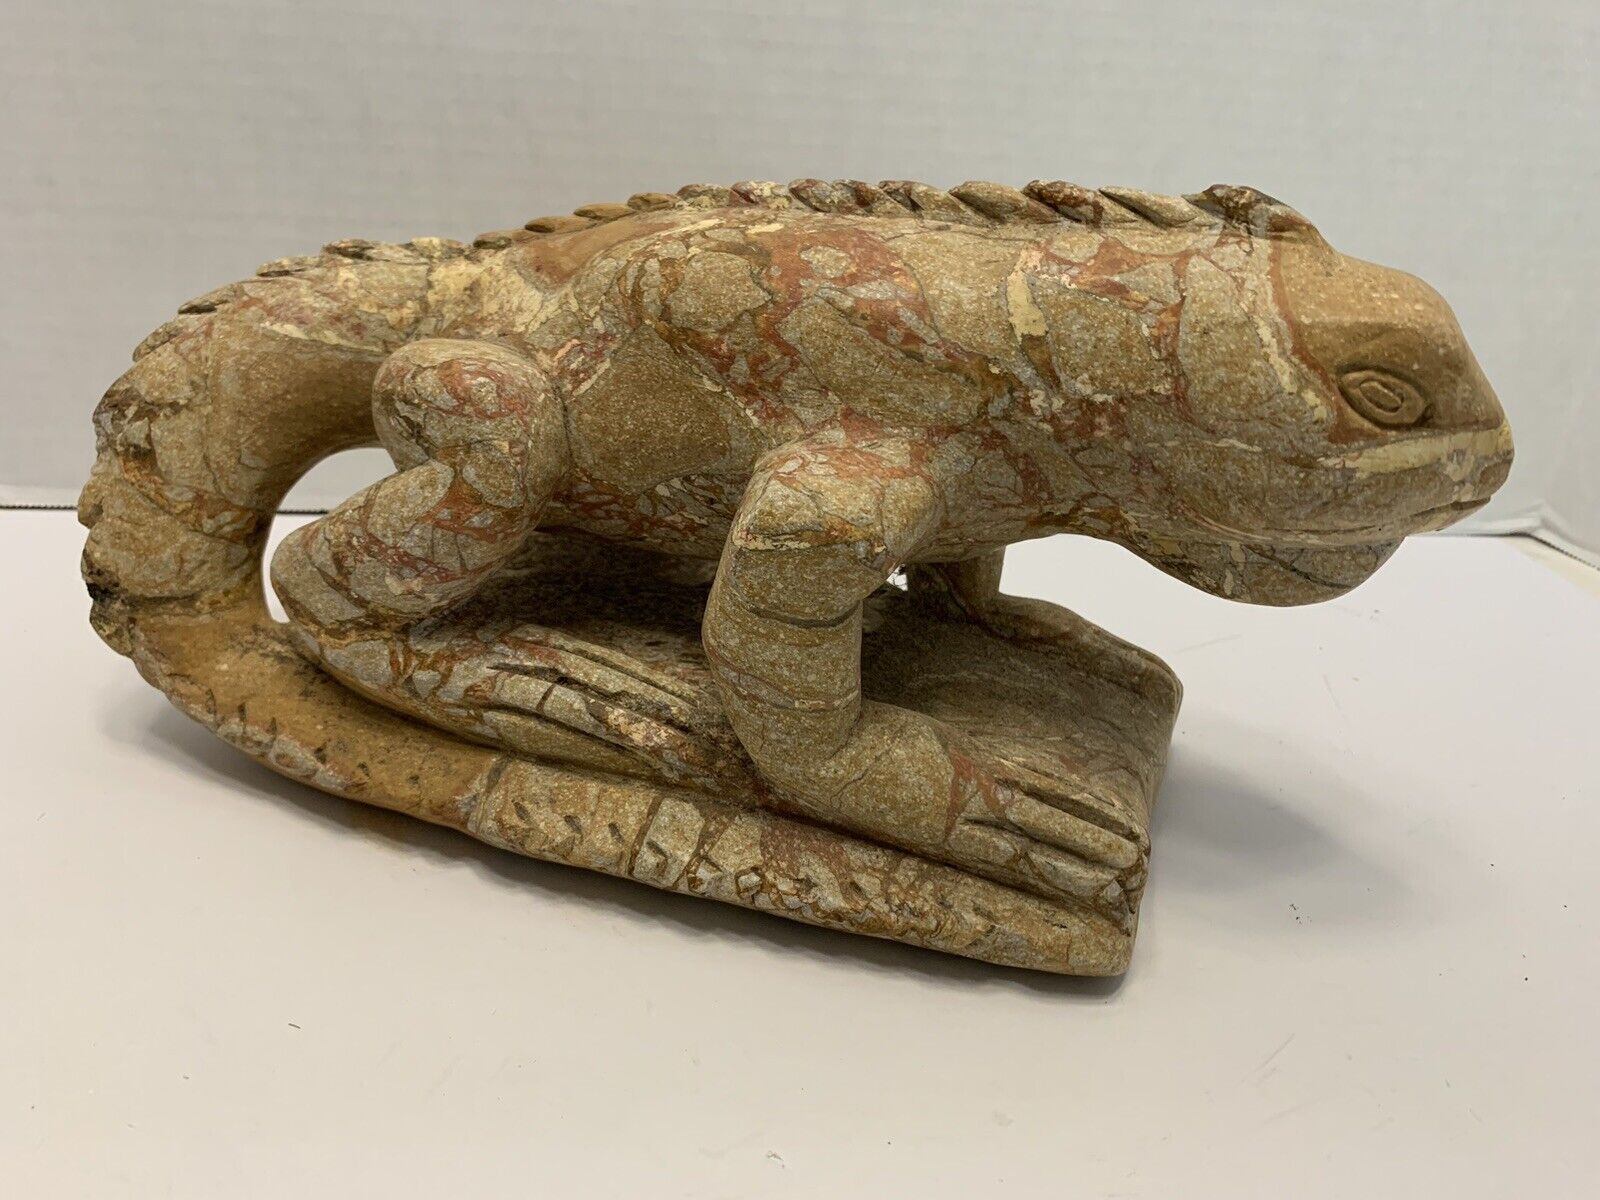 ULTRA RARE VINTAGE HAND-CARVED STONE IGUANA SCULPTURE 9+ lbs .. READ